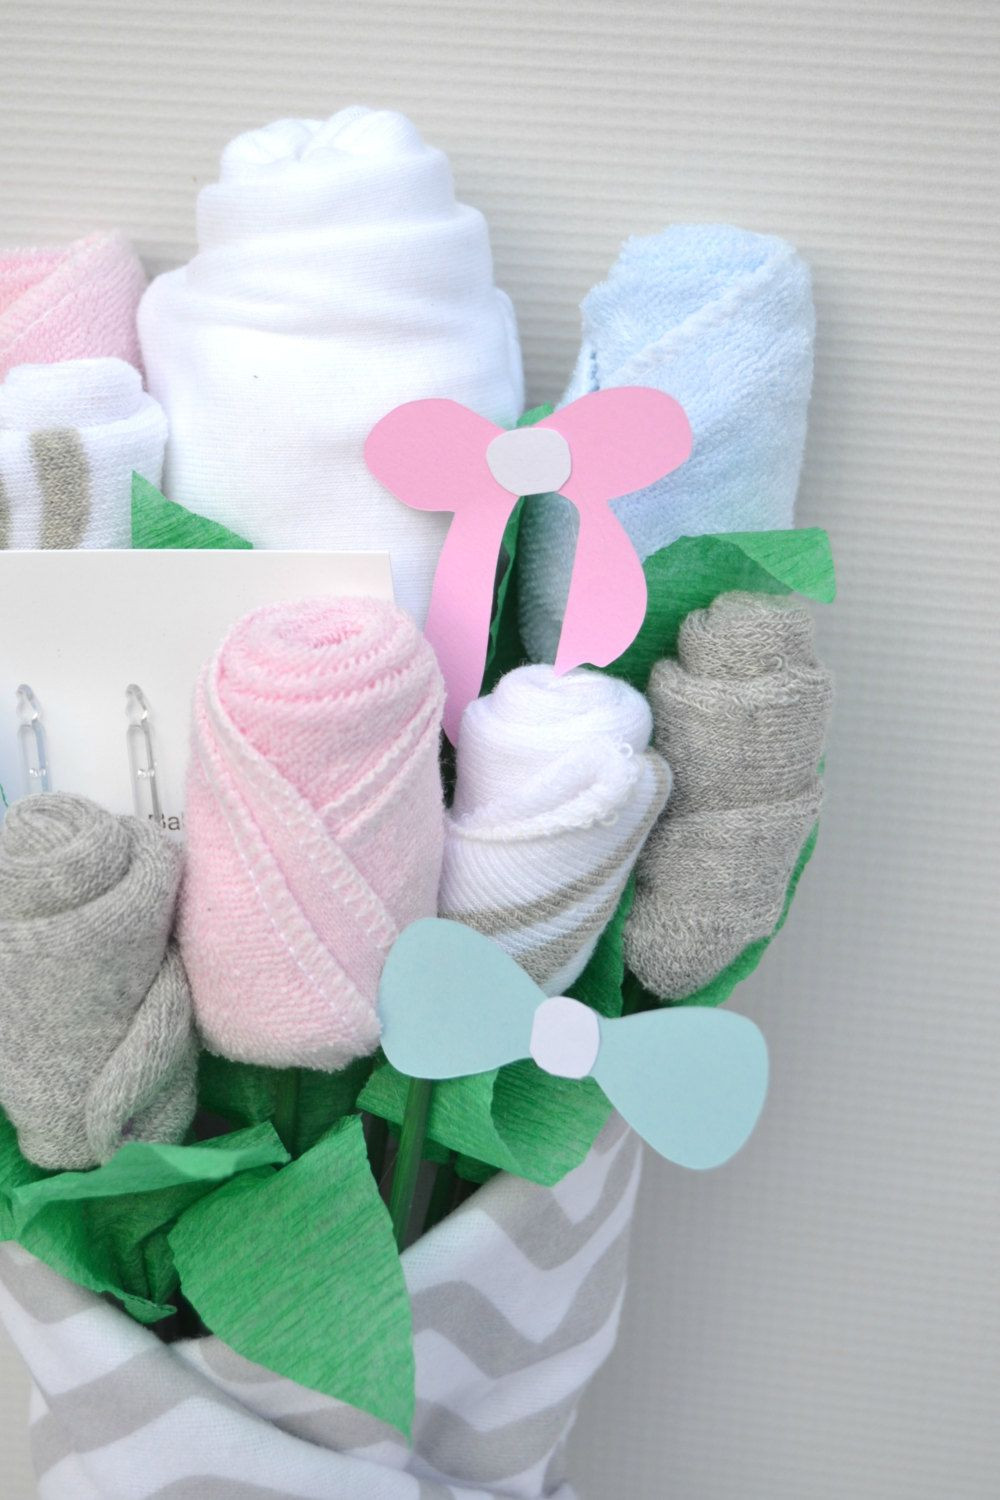 21-best-ideas-baby-gender-reveal-party-gifts-home-family-style-and